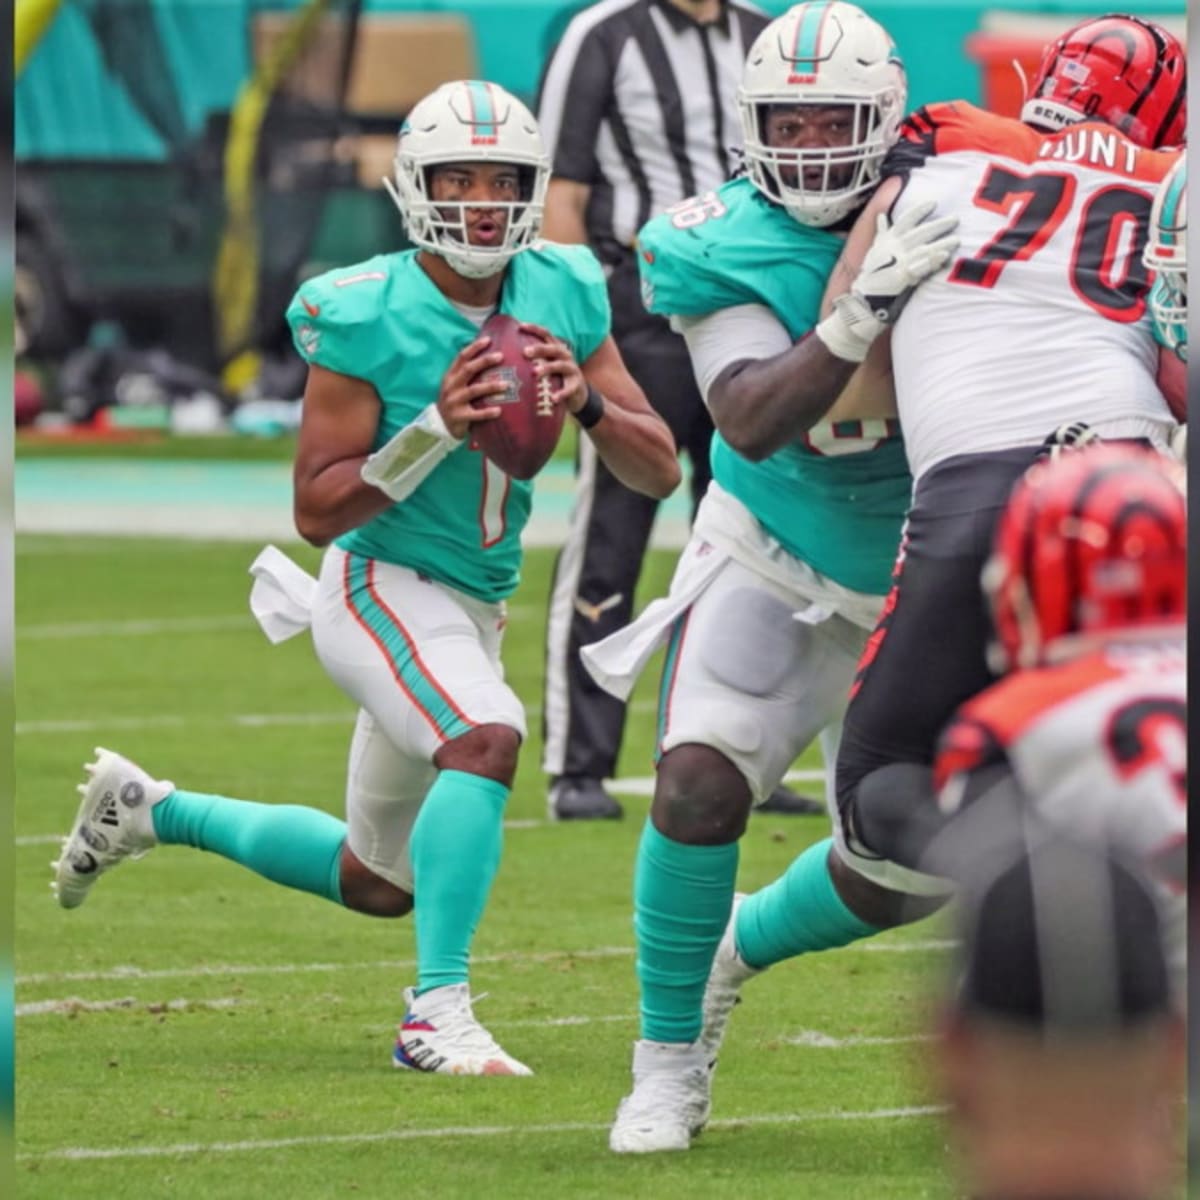 Tua throws for 296 yards as Dolphins beat Bengals 19-7